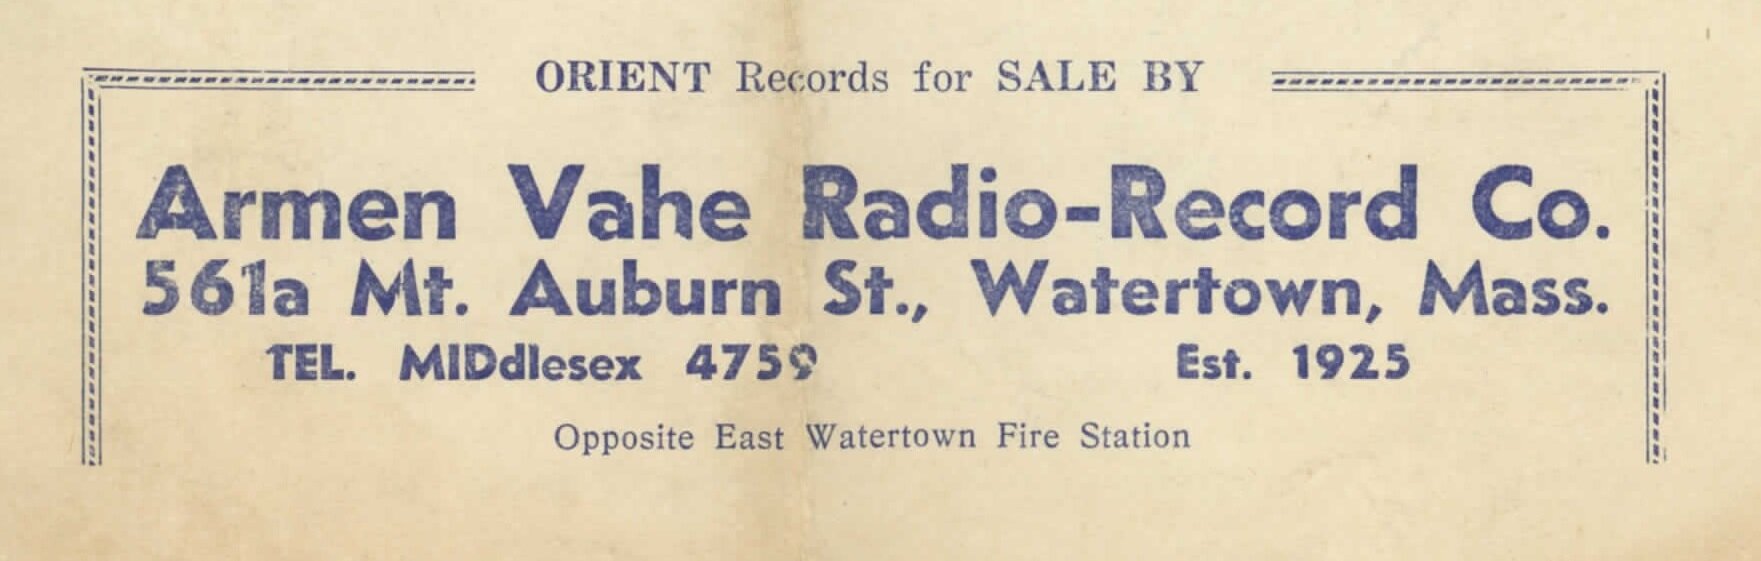  An advertisement for Orient Records label operated by Armen Vahe Radio-record Co. Detail from label catalog. (Scan: Armenian Museum) 